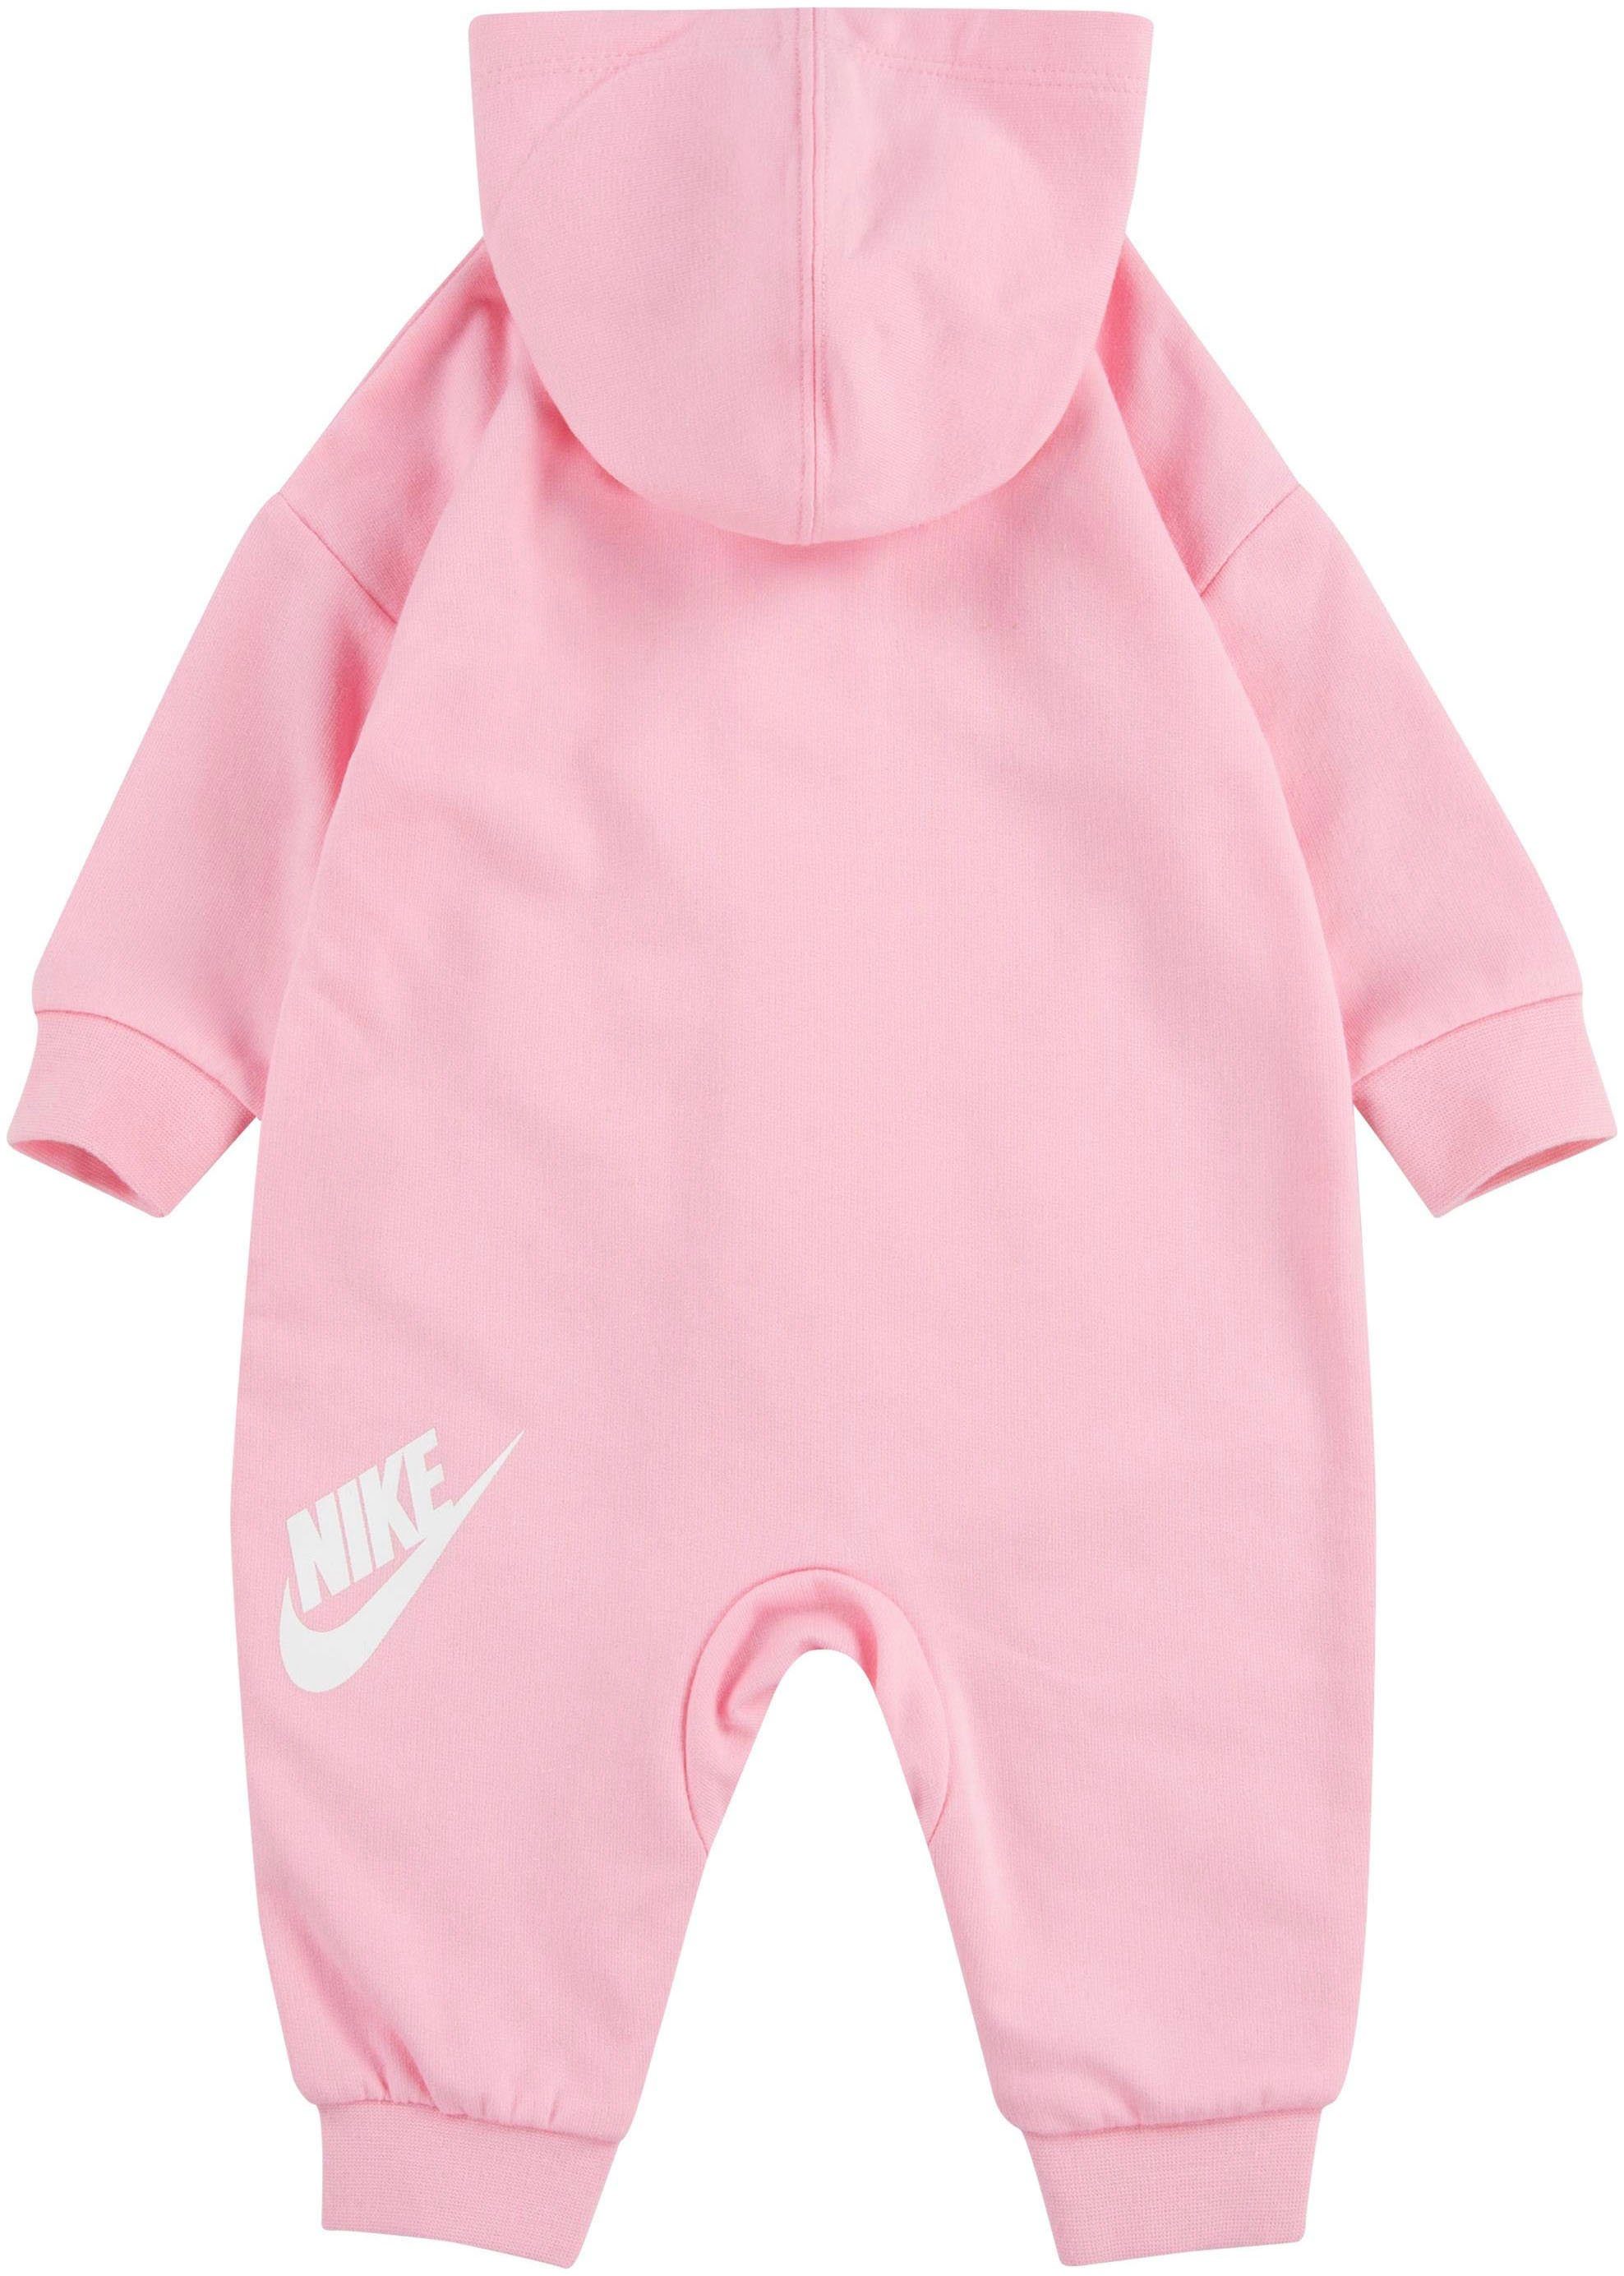 Nike Sportswear Strampler ALL COVERALL PLAY DAY NKN rosa-weiß